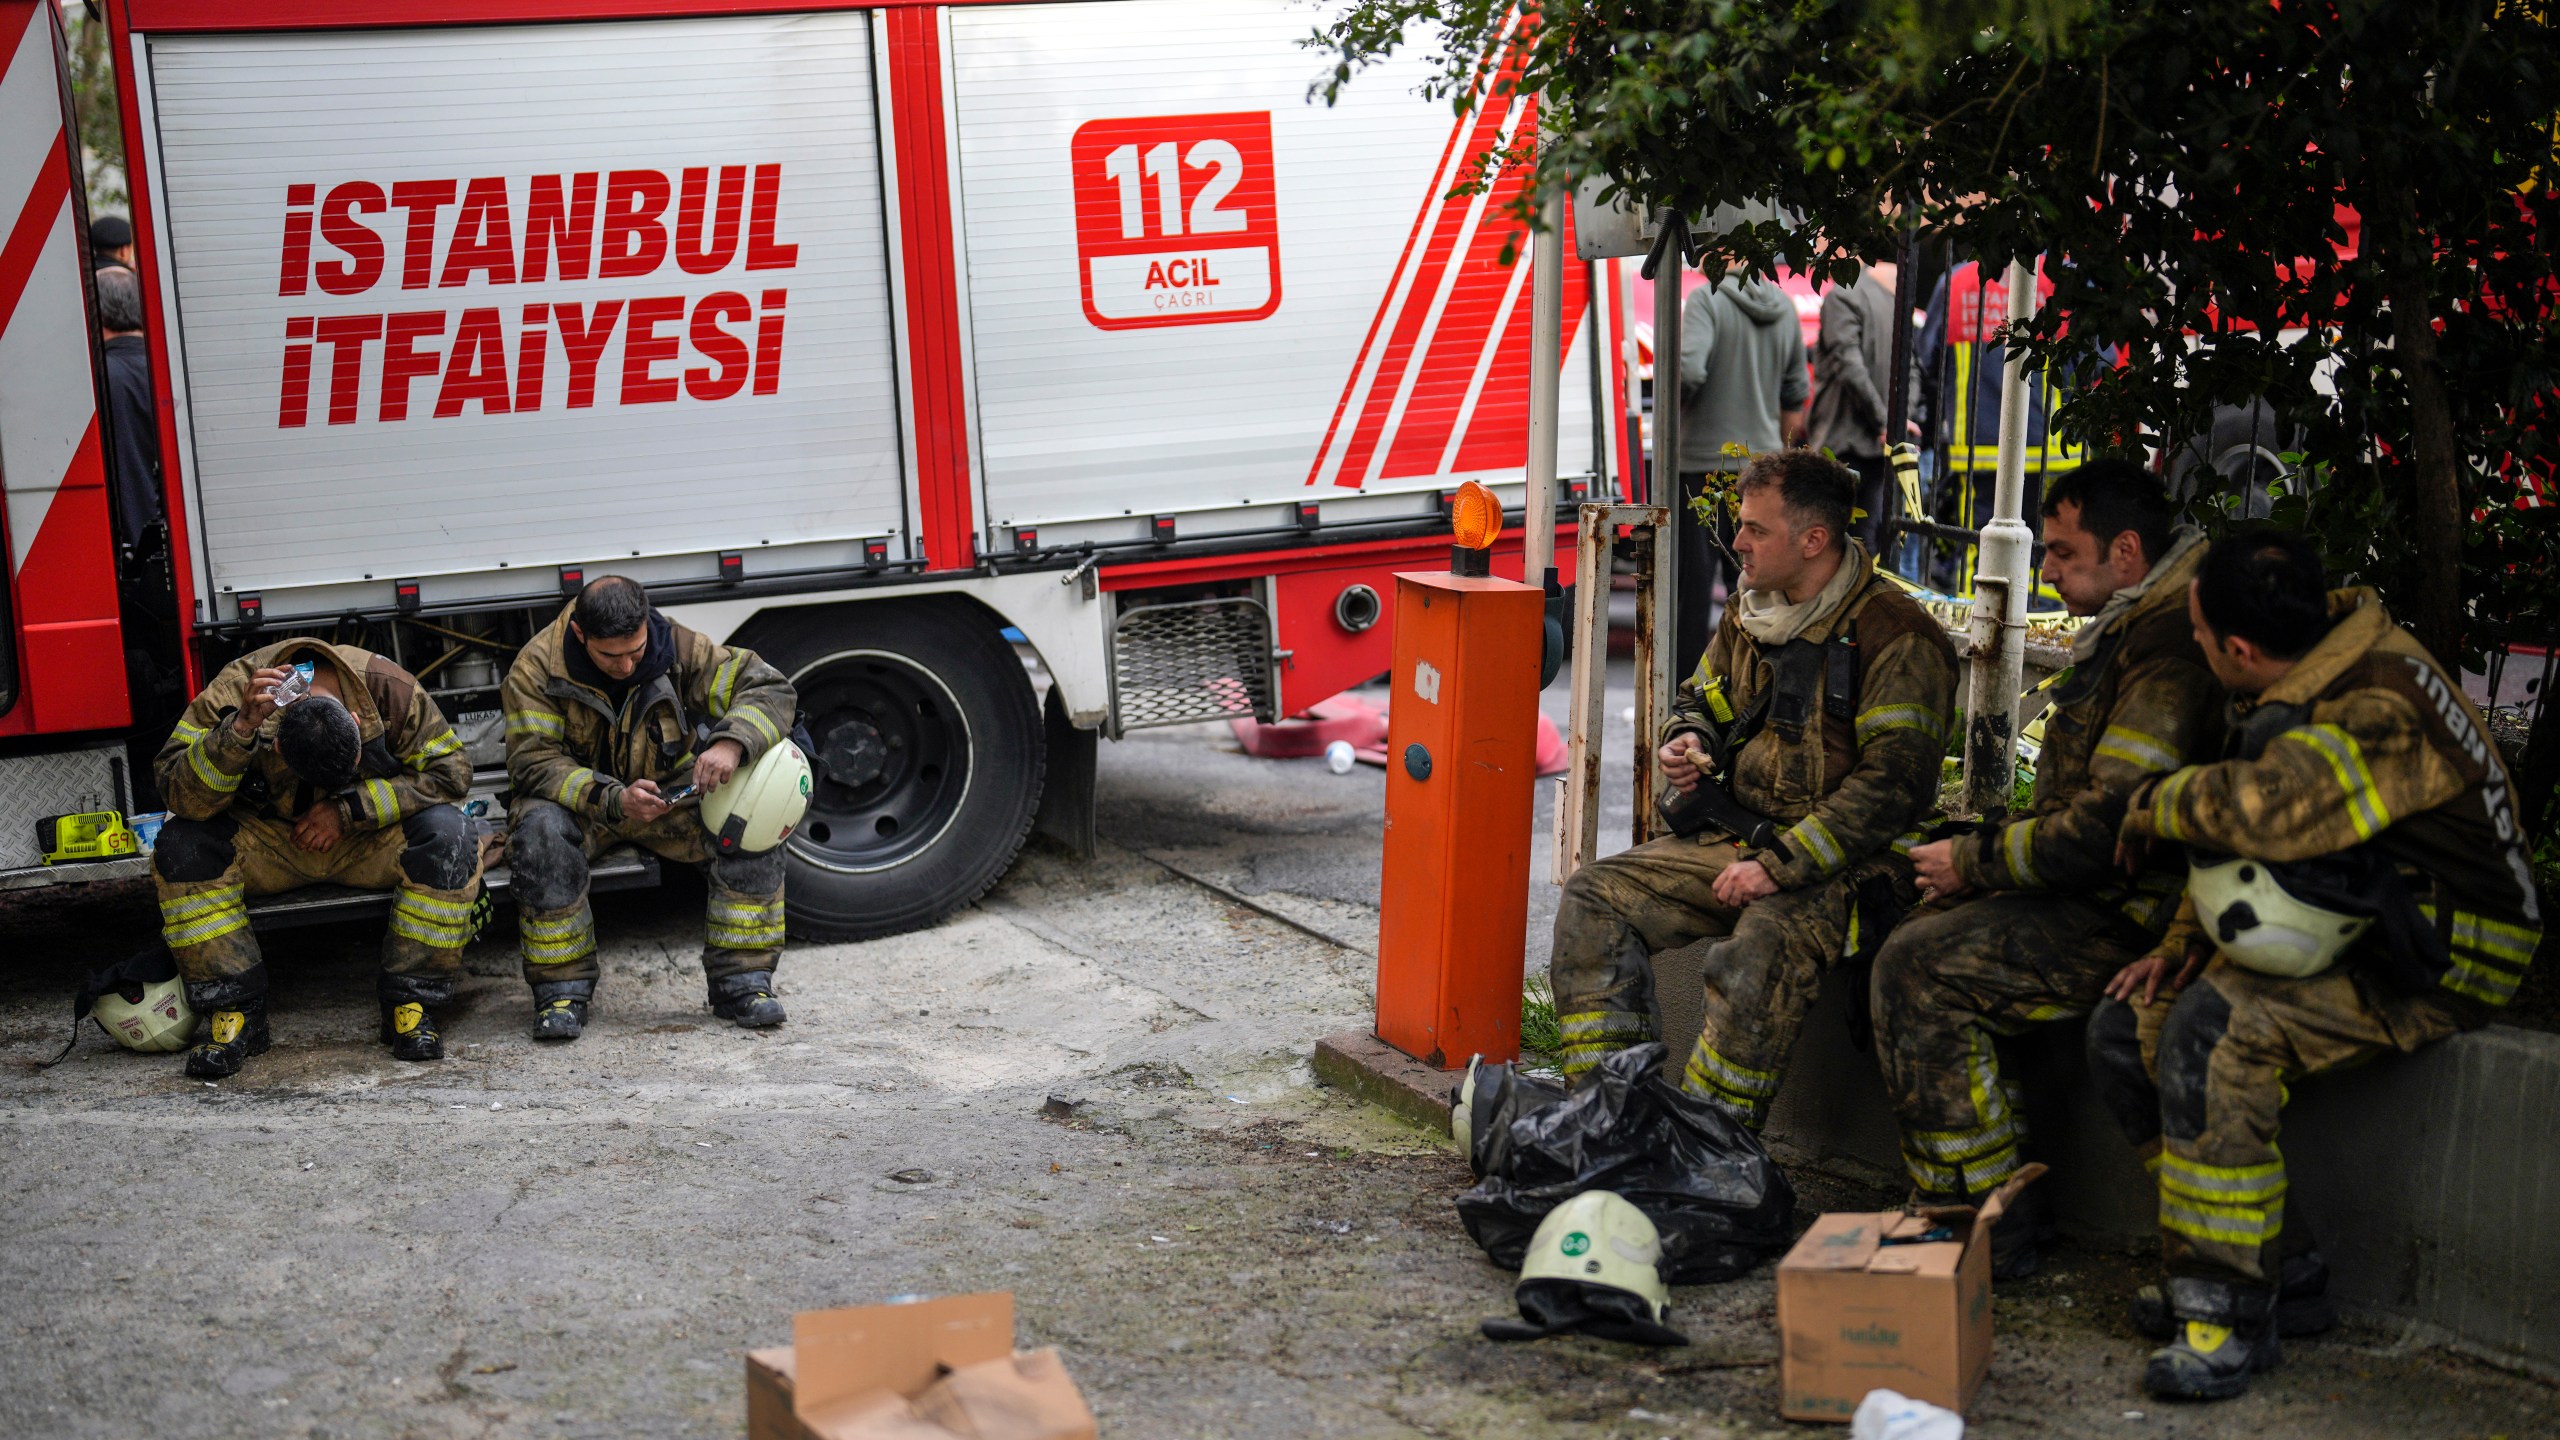 Firefighters rest in the aftermath of a fire in a nightclub in Istanbul, Turkey, Tuesday, April 2, 2024. A fire at an Istanbul nightclub during renovations on Tuesday killed at least 29 people, officials and reports said. Several people, including managers of the club, were detained for questioning. (AP Photo/Khalil Hamra)